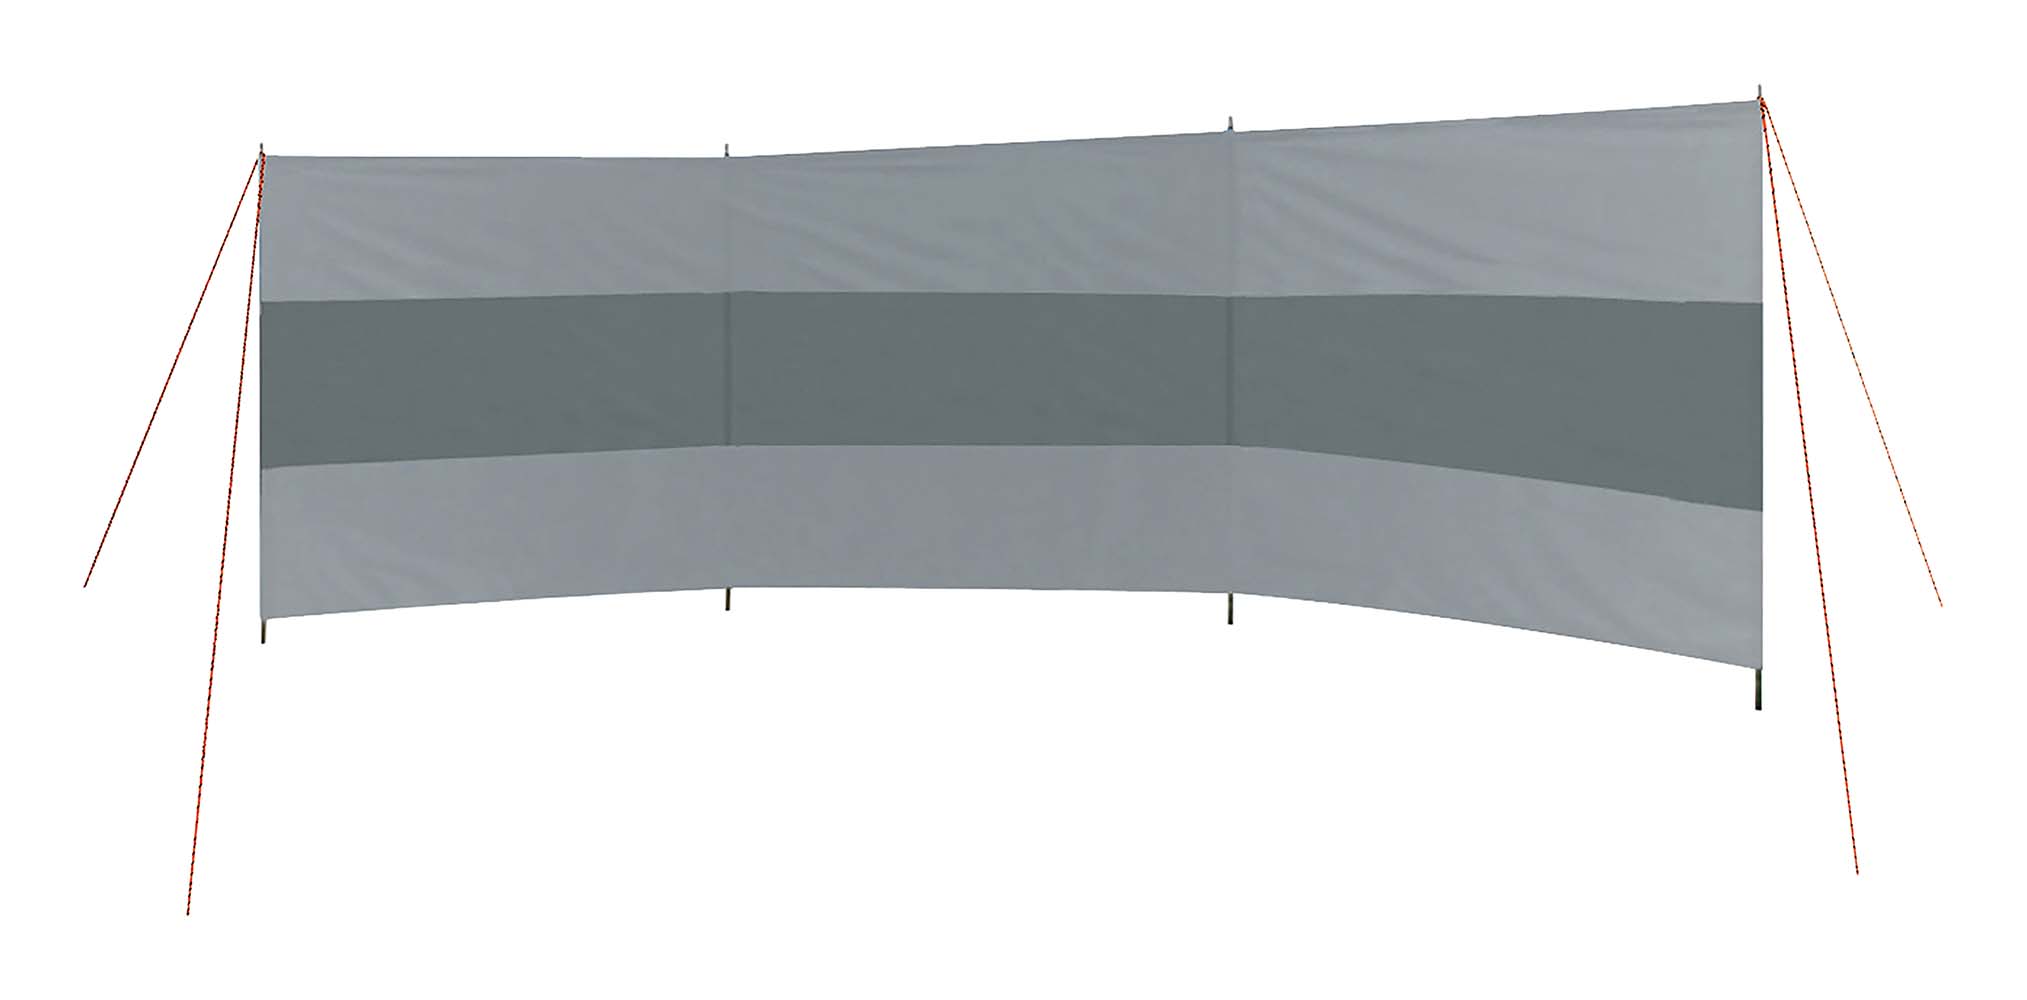 4367627 A luxurious and extra stable 3-sided windbreak. Made of sturdy 150D Polyester with galvanized stronger steel poles. Equipped with a UV resistant coating. Ideal against the wind, against the sun or to sit out of sight. Because the windbreak consists of 3 compartments, the angle can be adjusted to any situation. The screen has a modern look and is equipped with upper beams for extra stability. Comes complete with a carrying bag, with guy ropes and pegs.